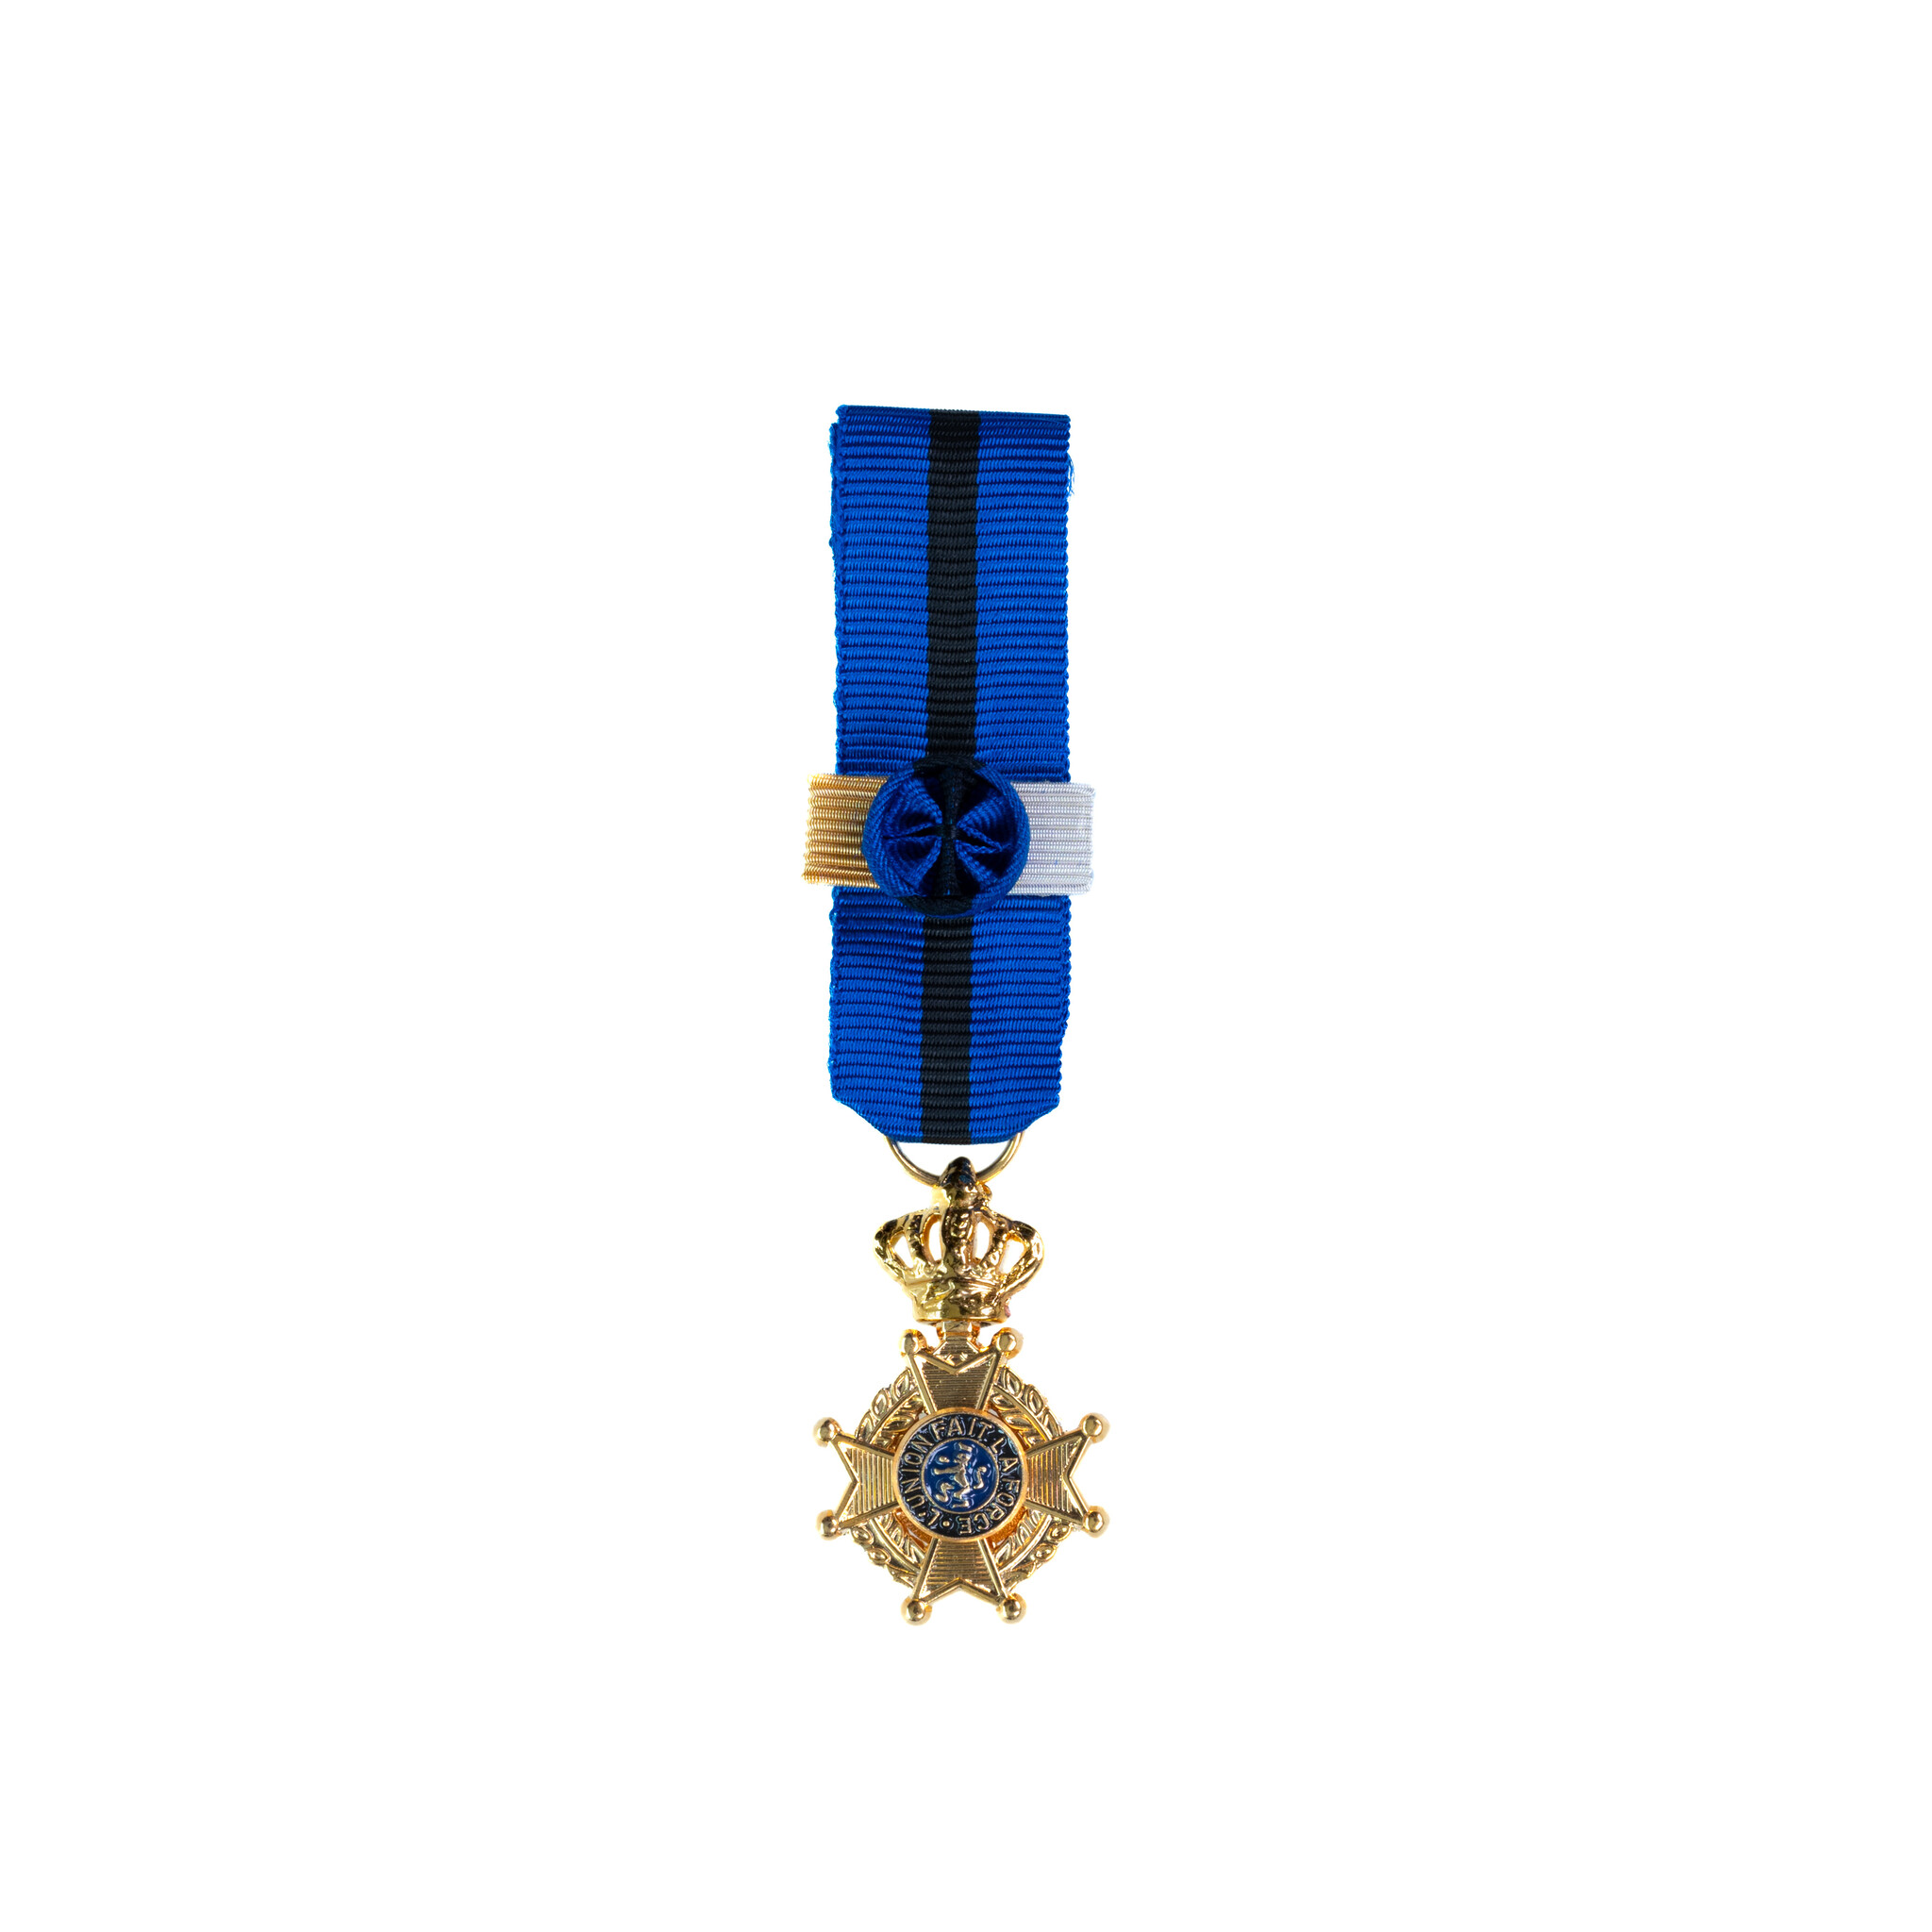 Grand Officer of the Order of Leopold II